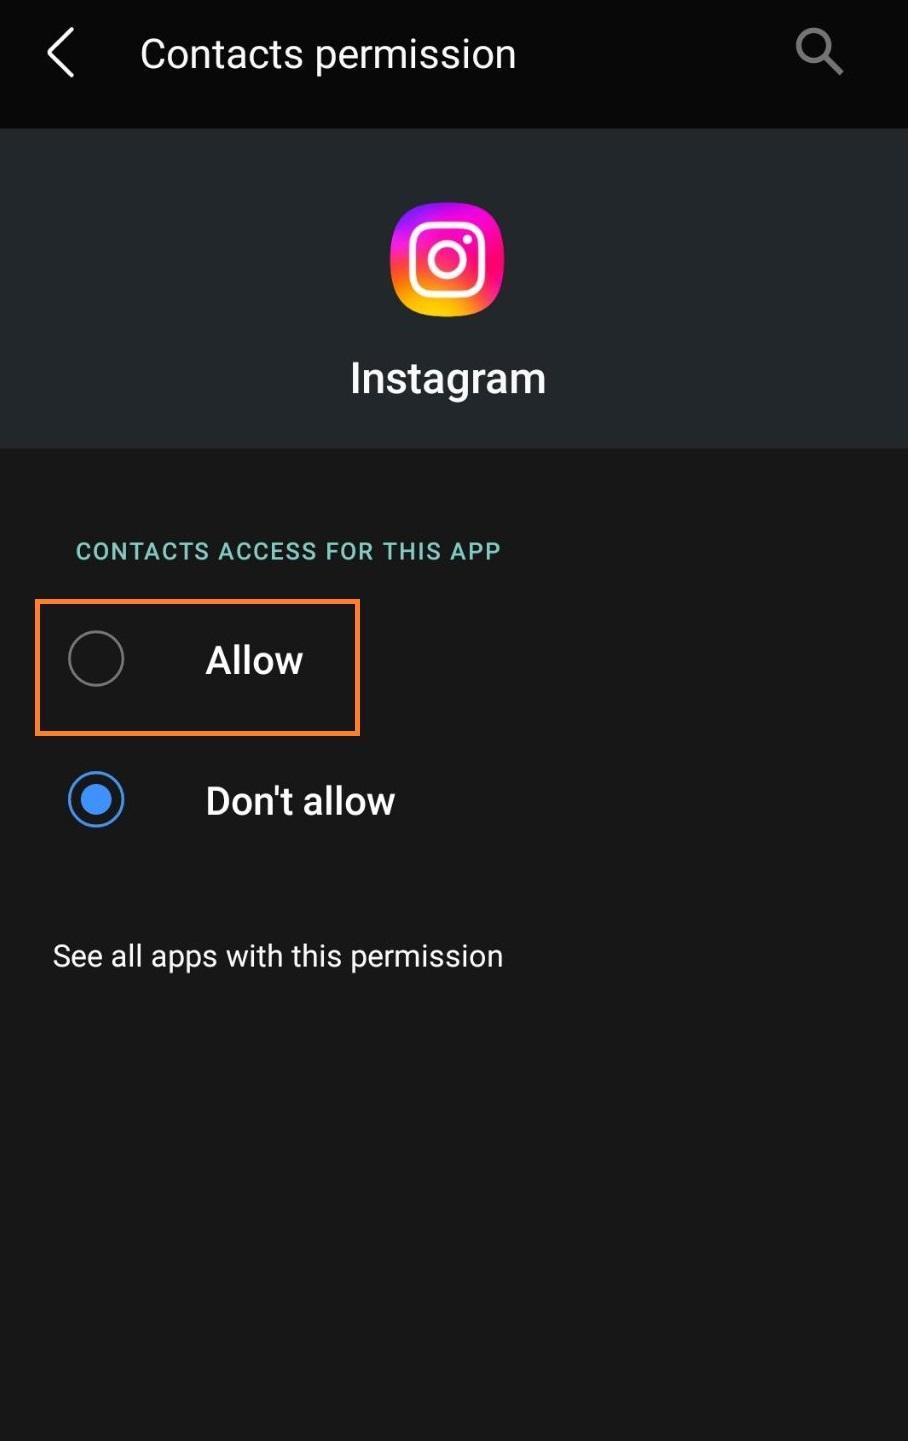 Choose to Allow Instagram access to your contacts.